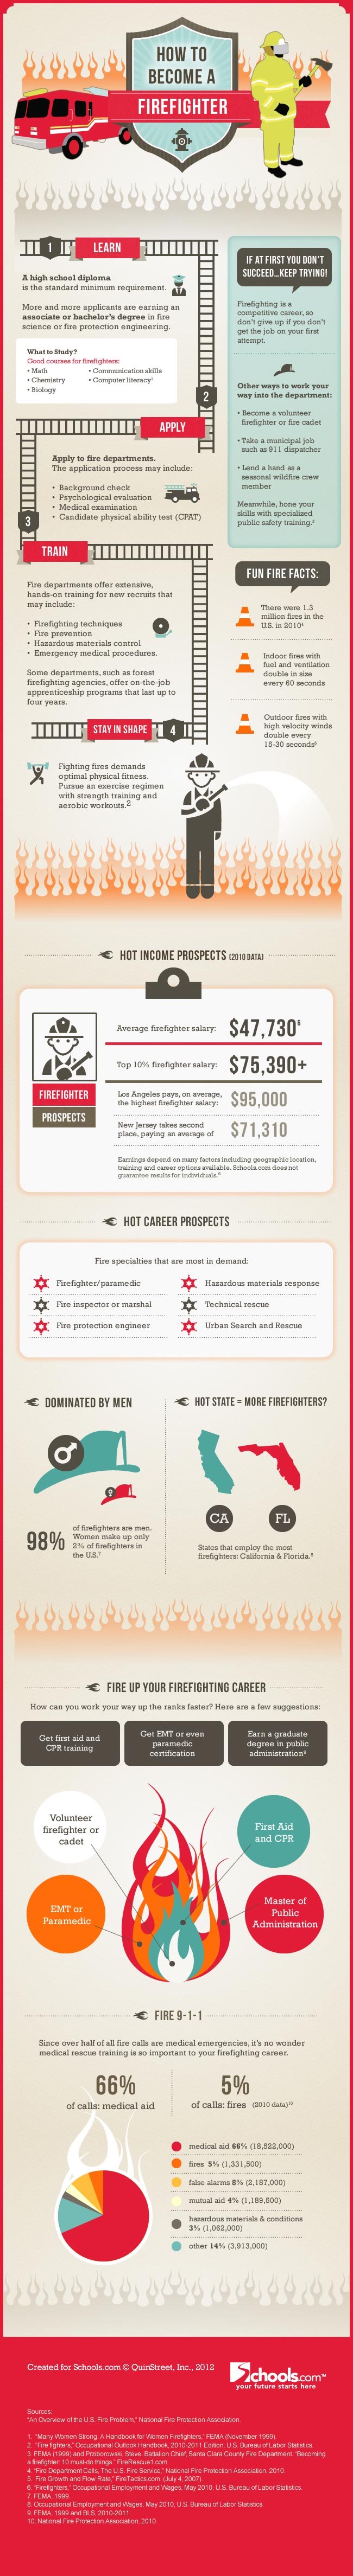 How To Become a Firefighter #Infographic